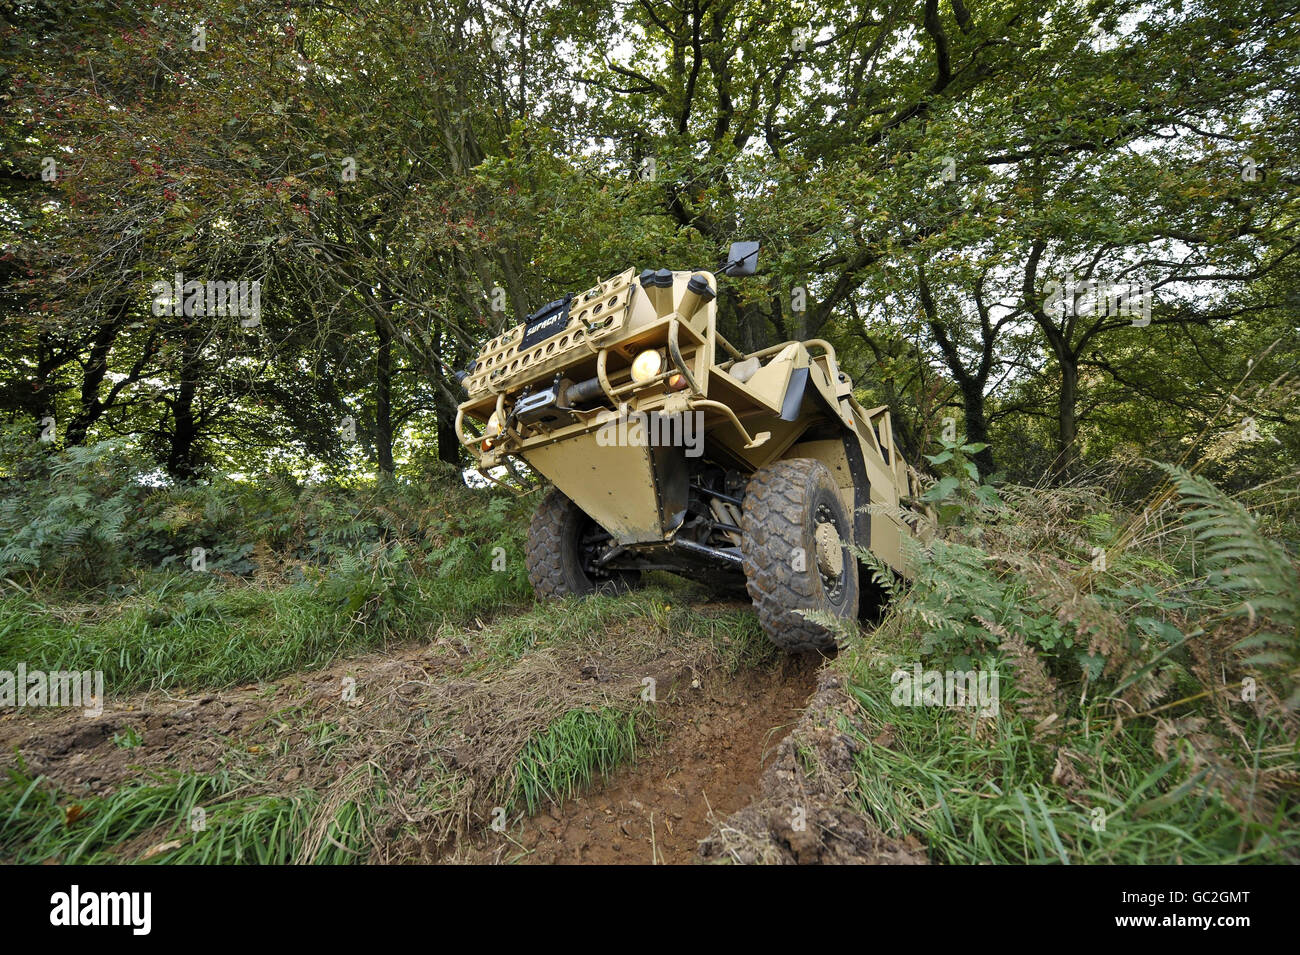 A Supacat high mobility vehicle named the 'Jackal' by the British military forces is pictured during a test run for the media in a wooded area near Dunkerswell, Honiton, Devon, where the vehicles are manufactured. Stock Photo